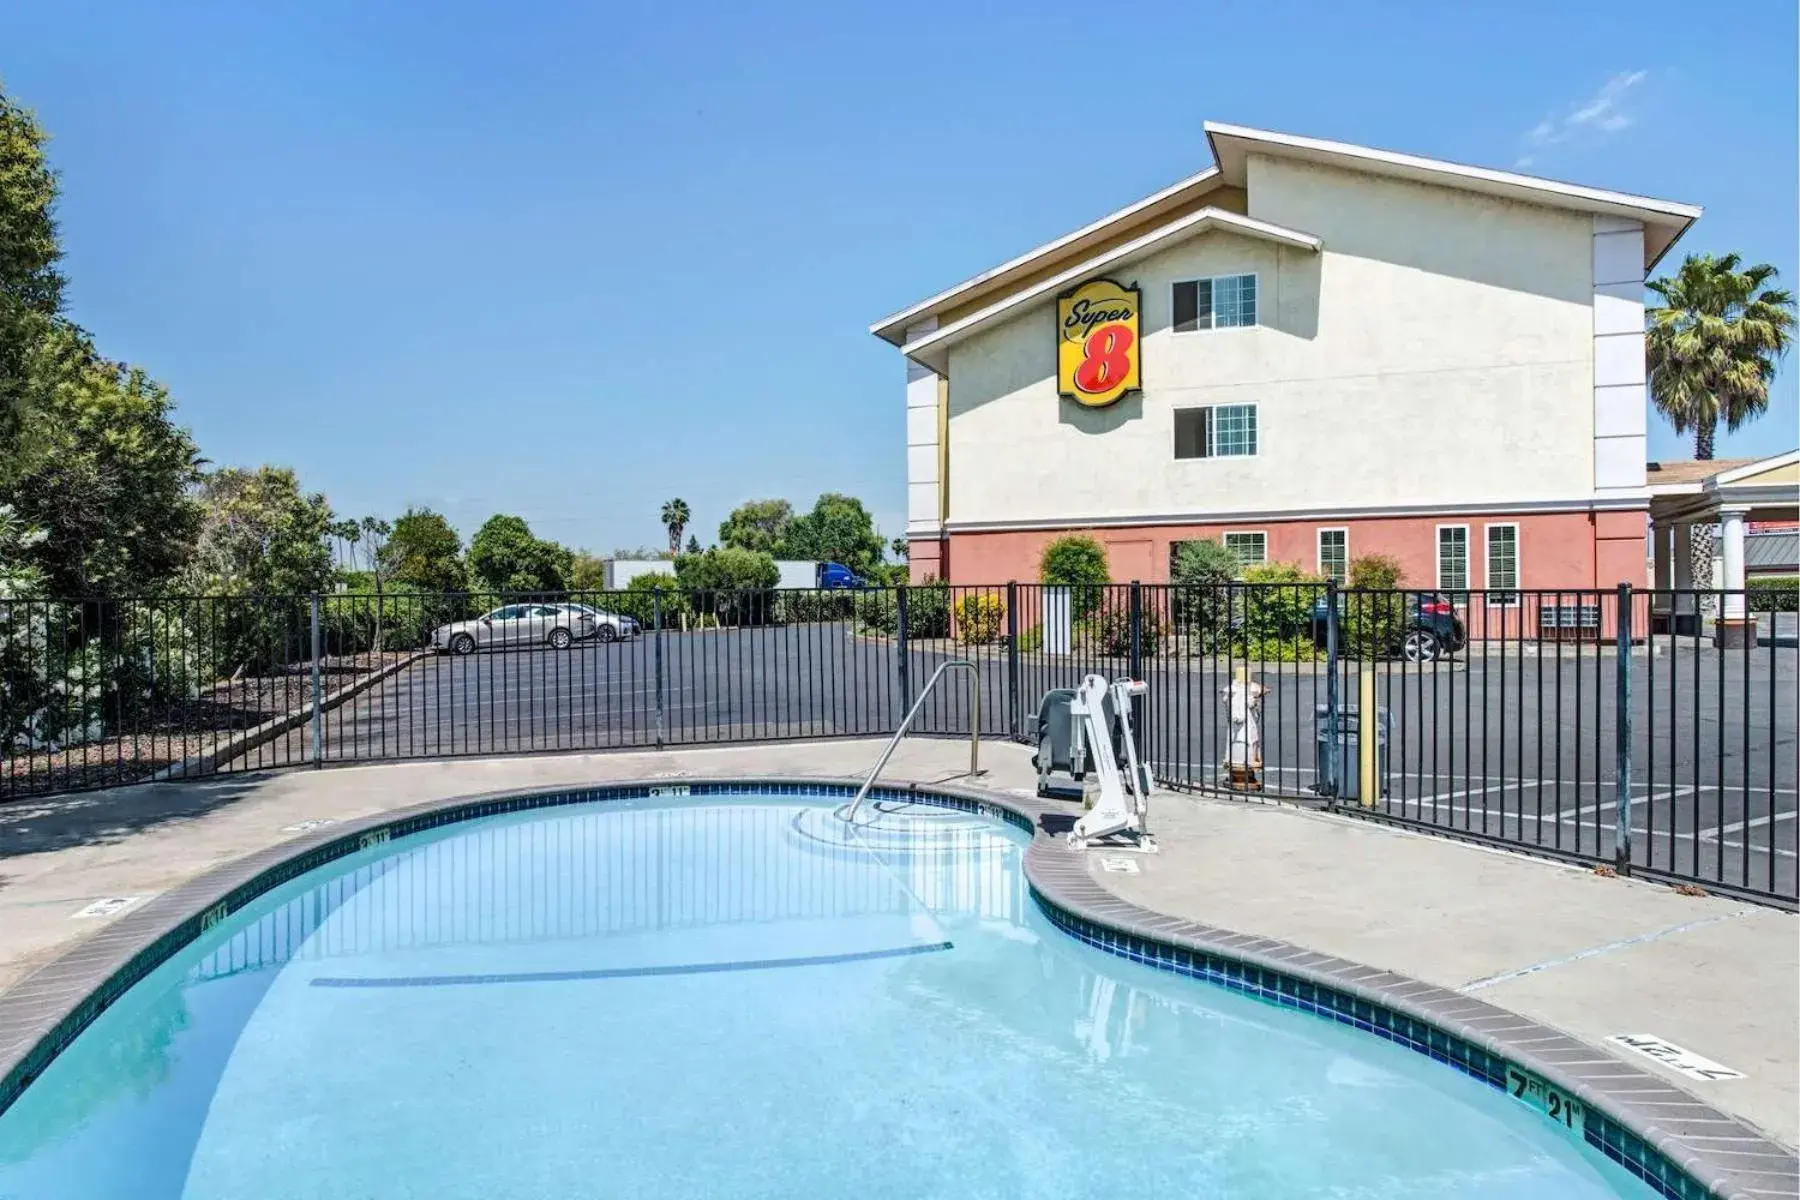 Swimming Pool in Super 8 by Wyndham Sacramento/Florin Rd